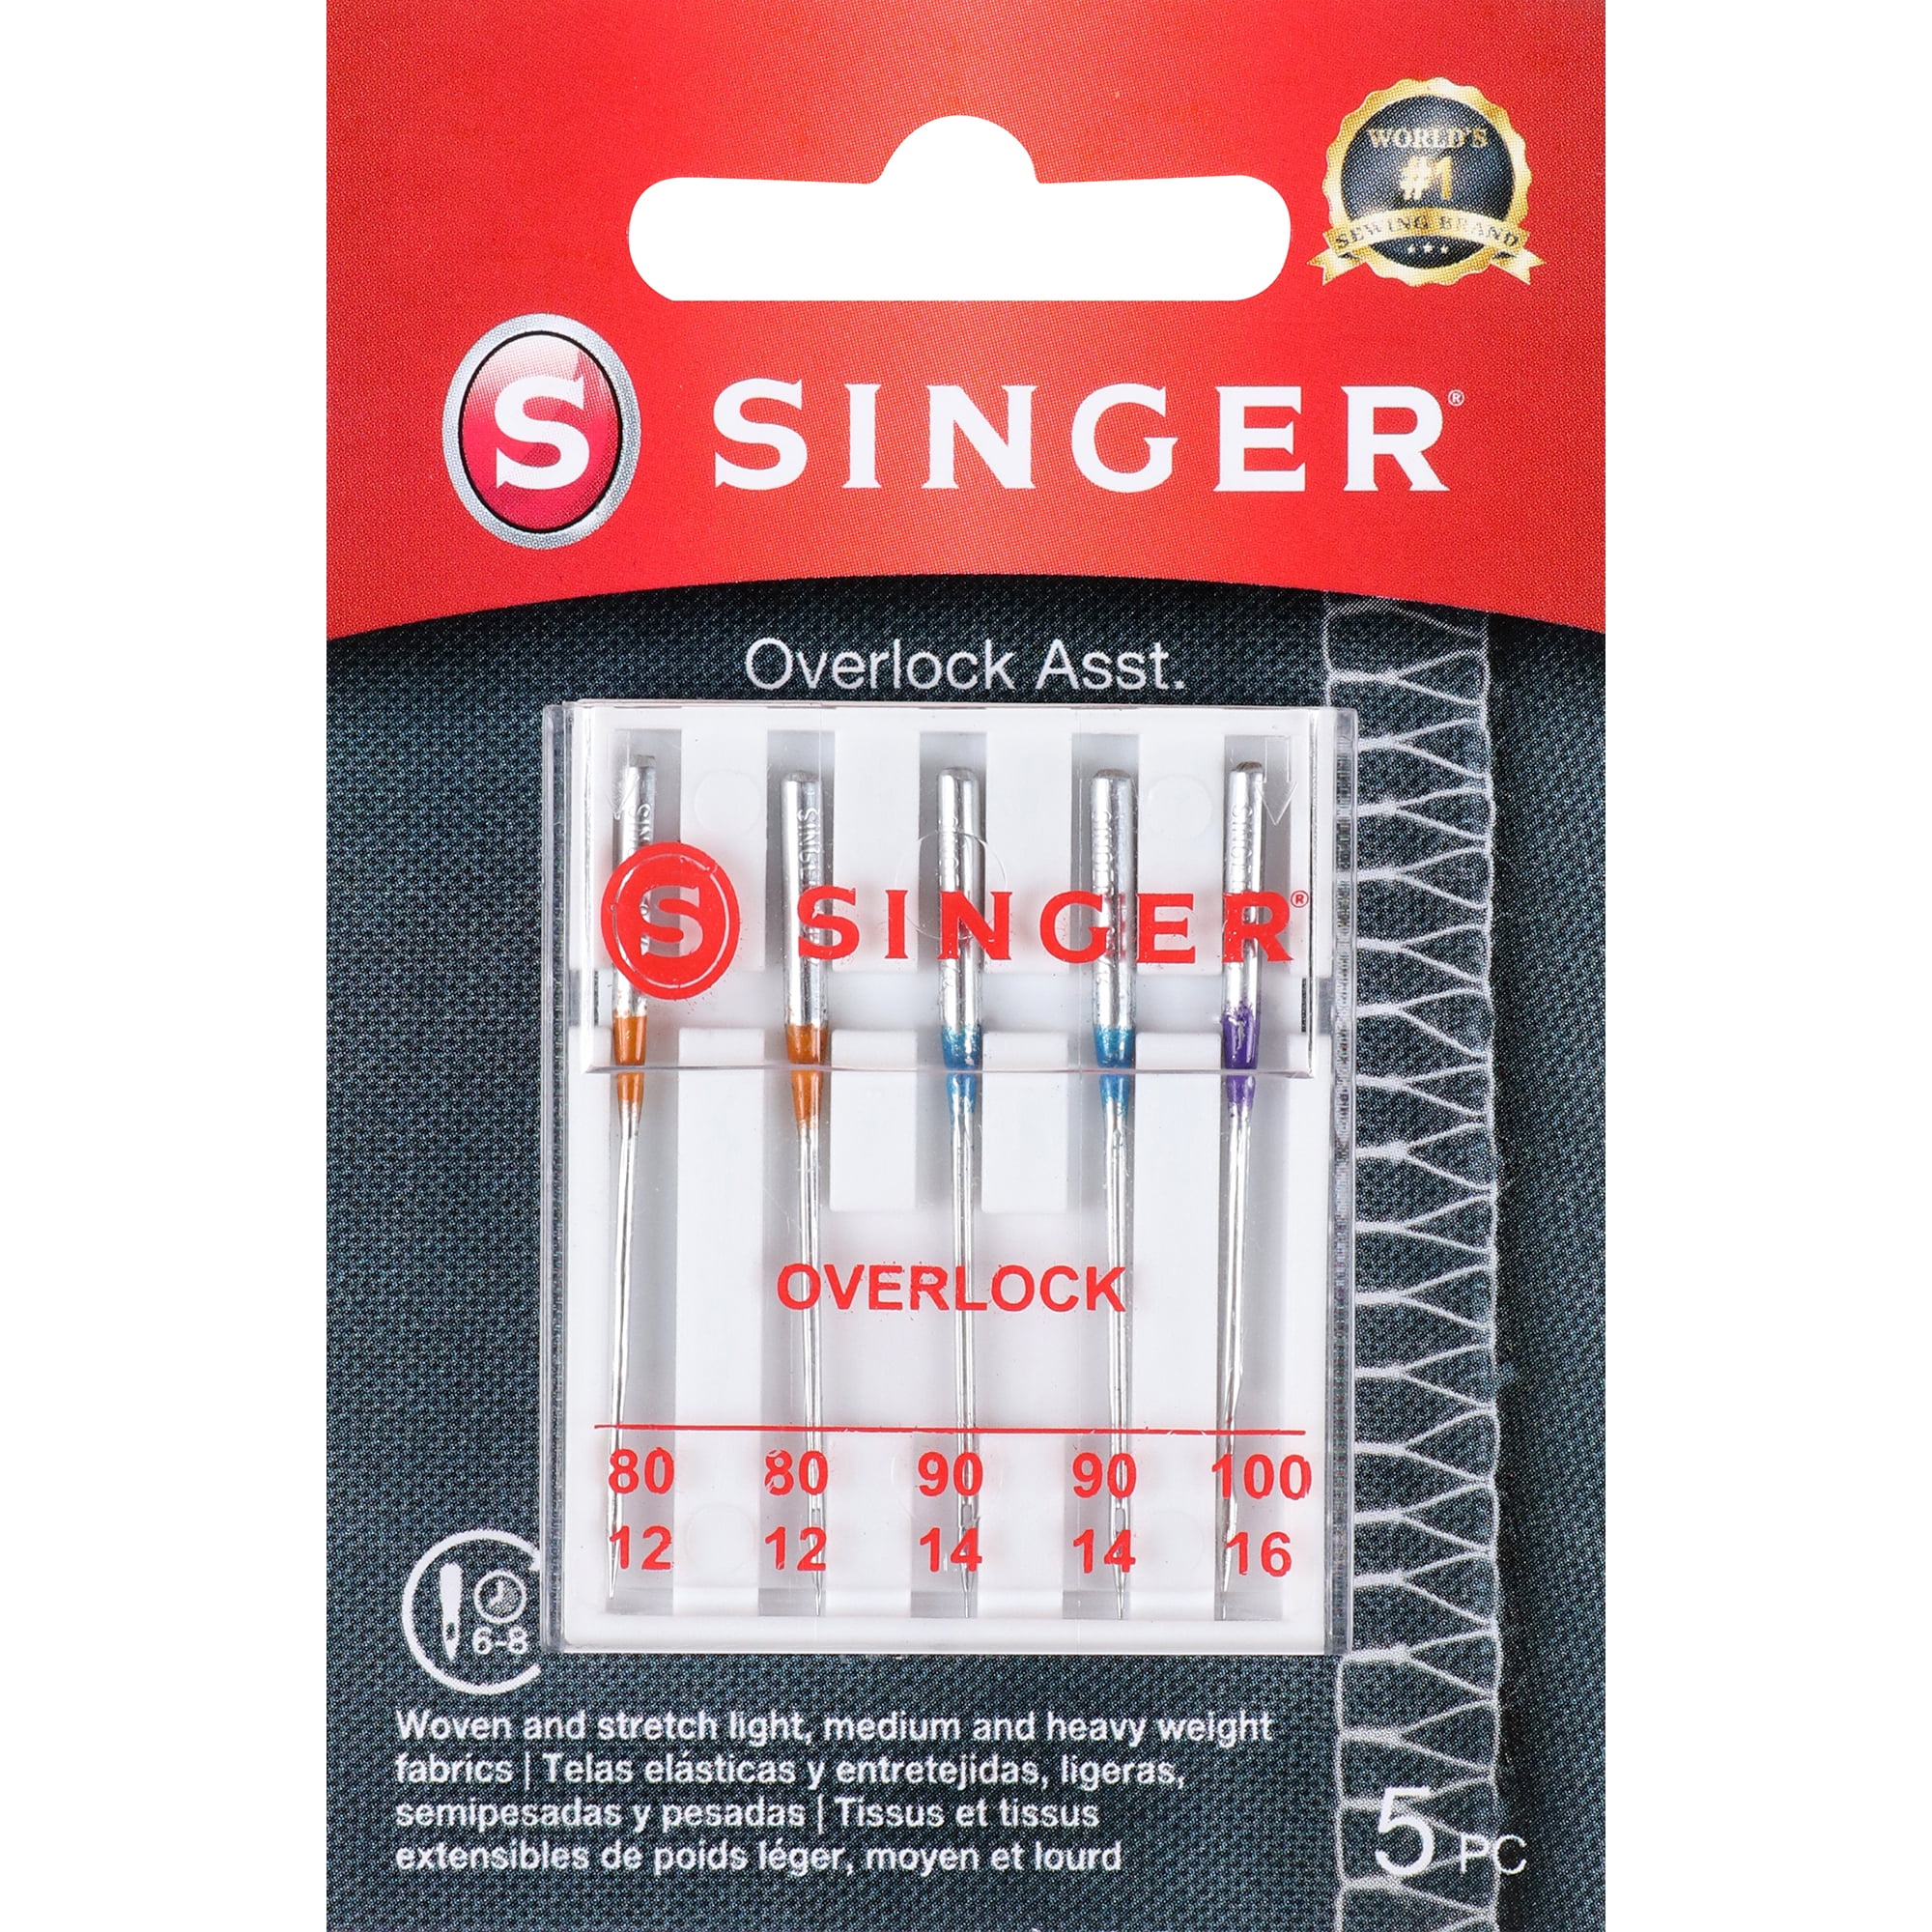 SASEW BROTHER Sewing Machine Needles by Organ ~ 20 pack (20 needles) SIZE 10